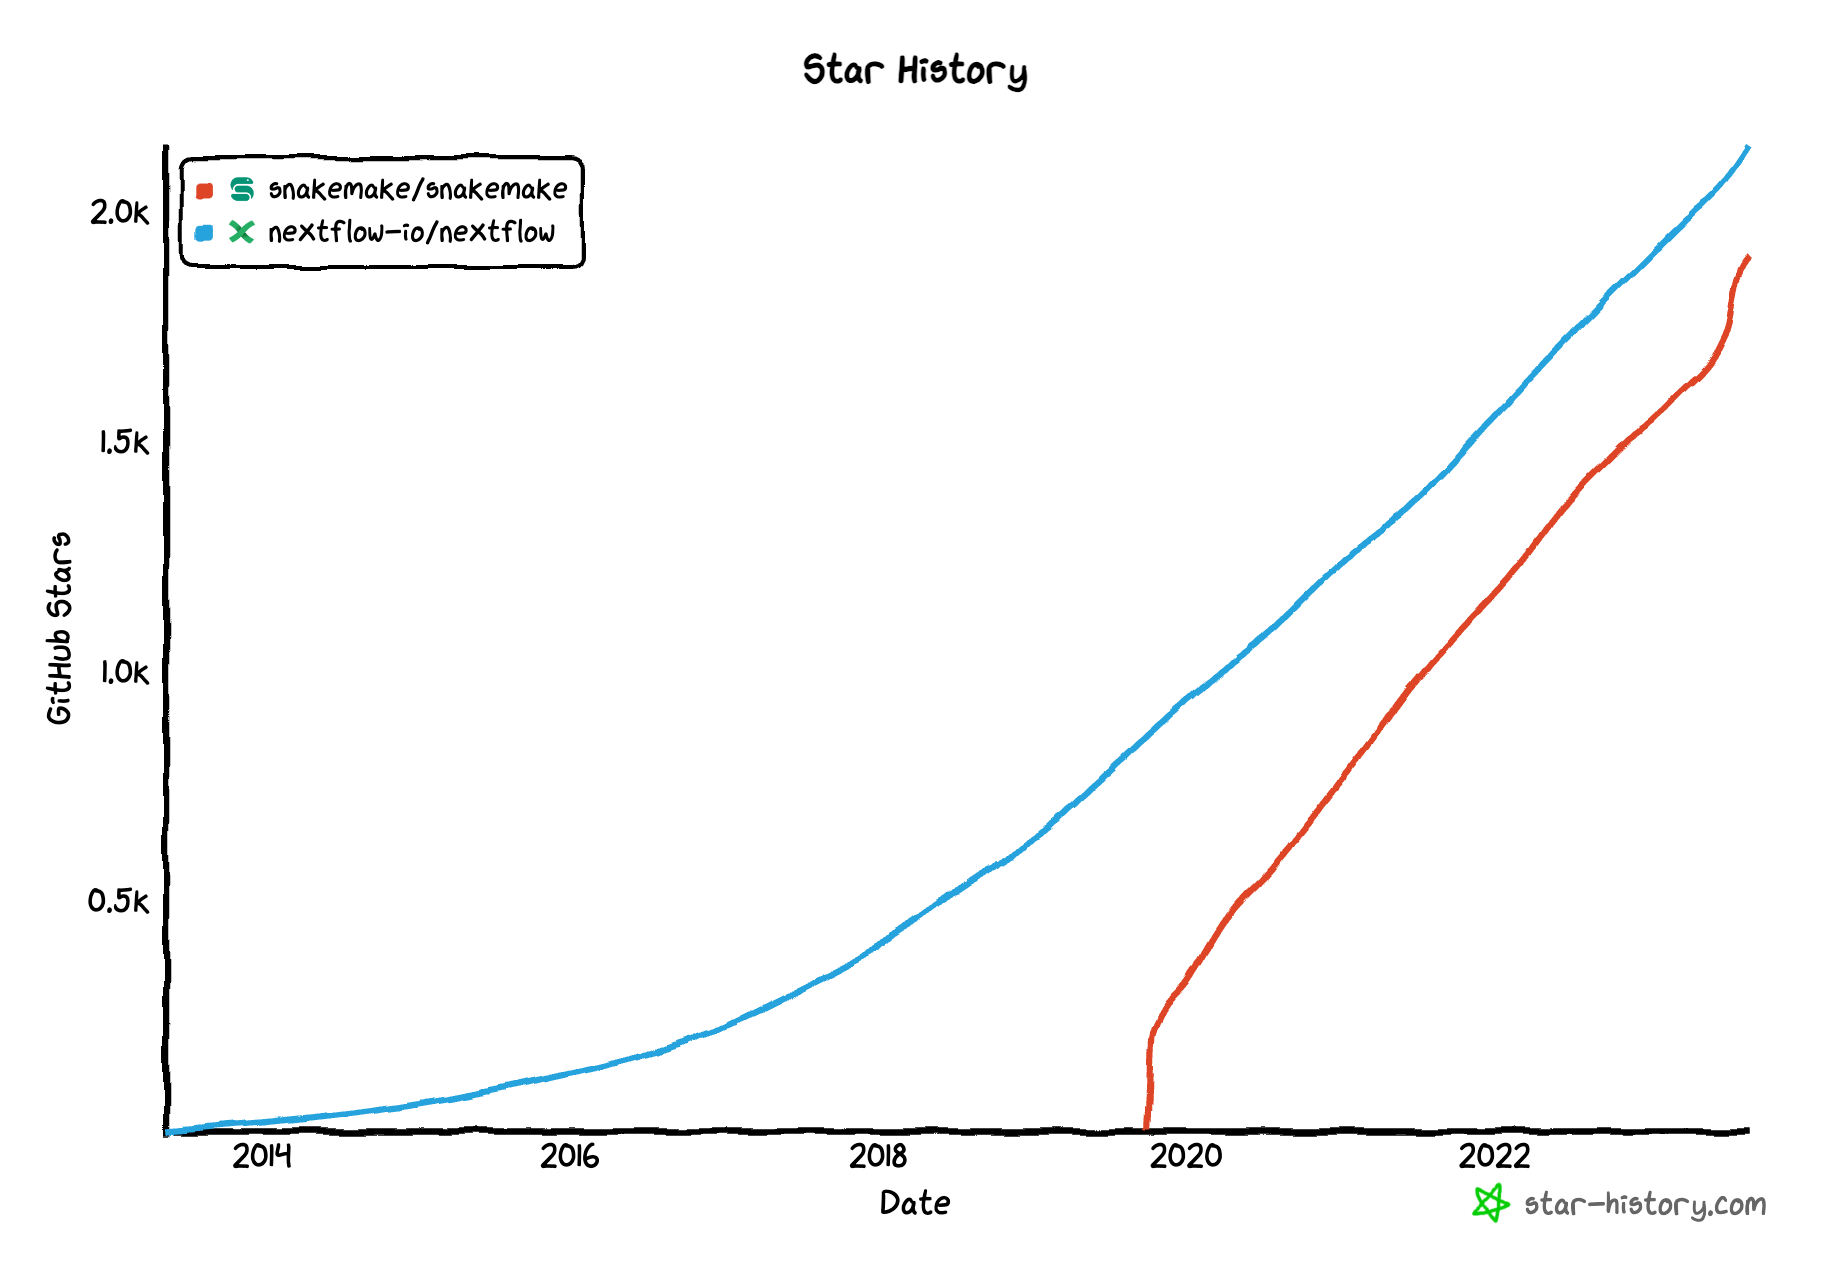 Chart showing Nextflow and Snakemake GitHub stars increasing rapidly over time